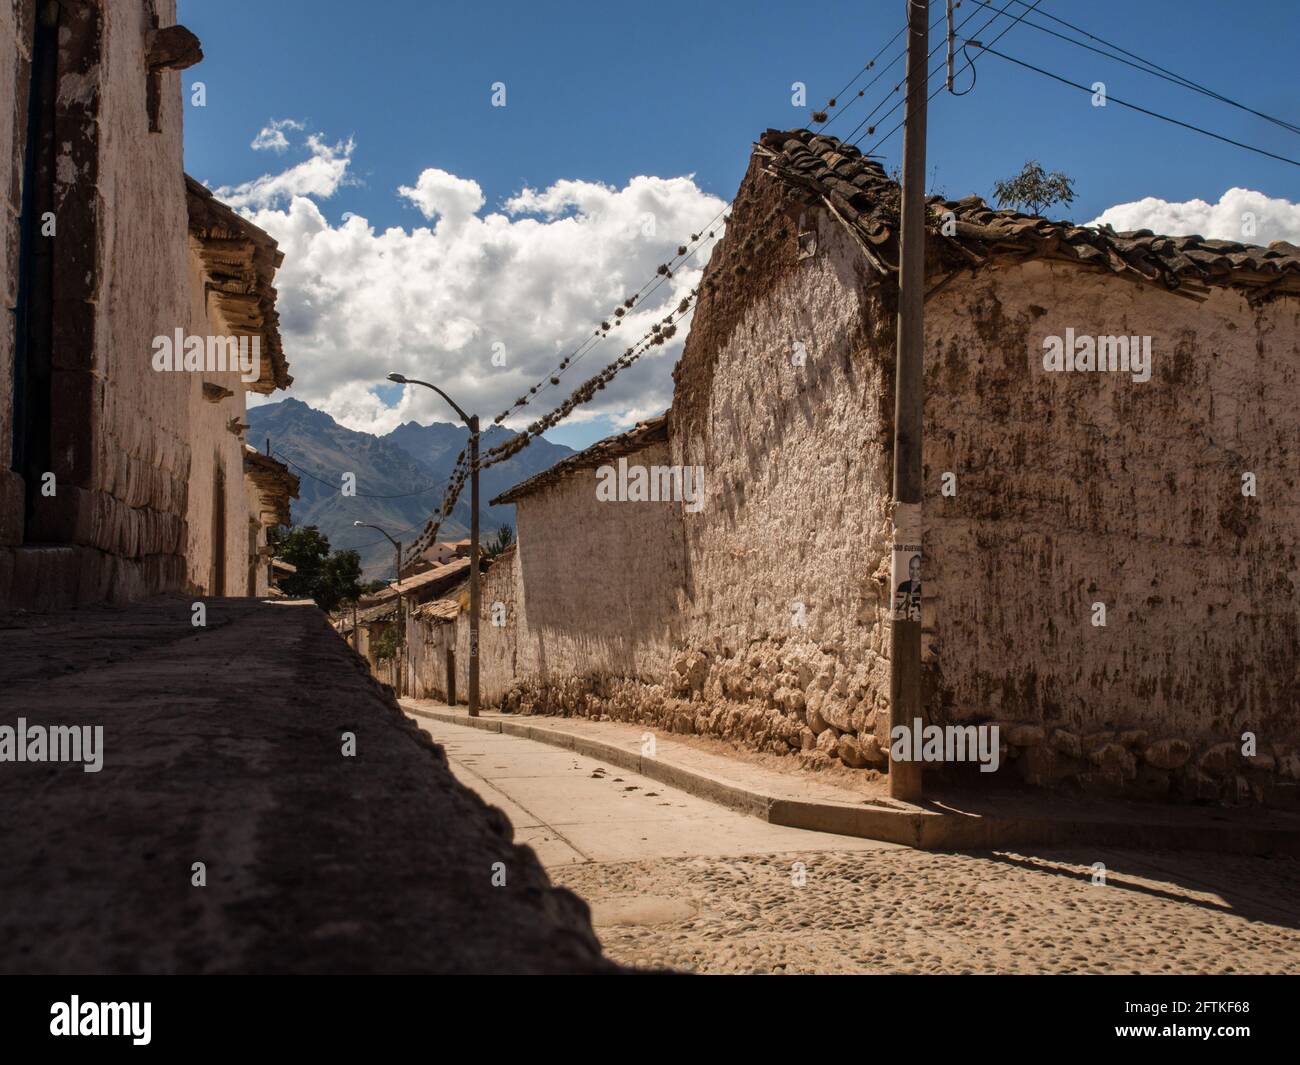 Maras, Peru May 20,  2016: Street in Moras. Homes of poor rural people are made of local materials, with floors of packed earth, walls of adobe and da Stock Photo